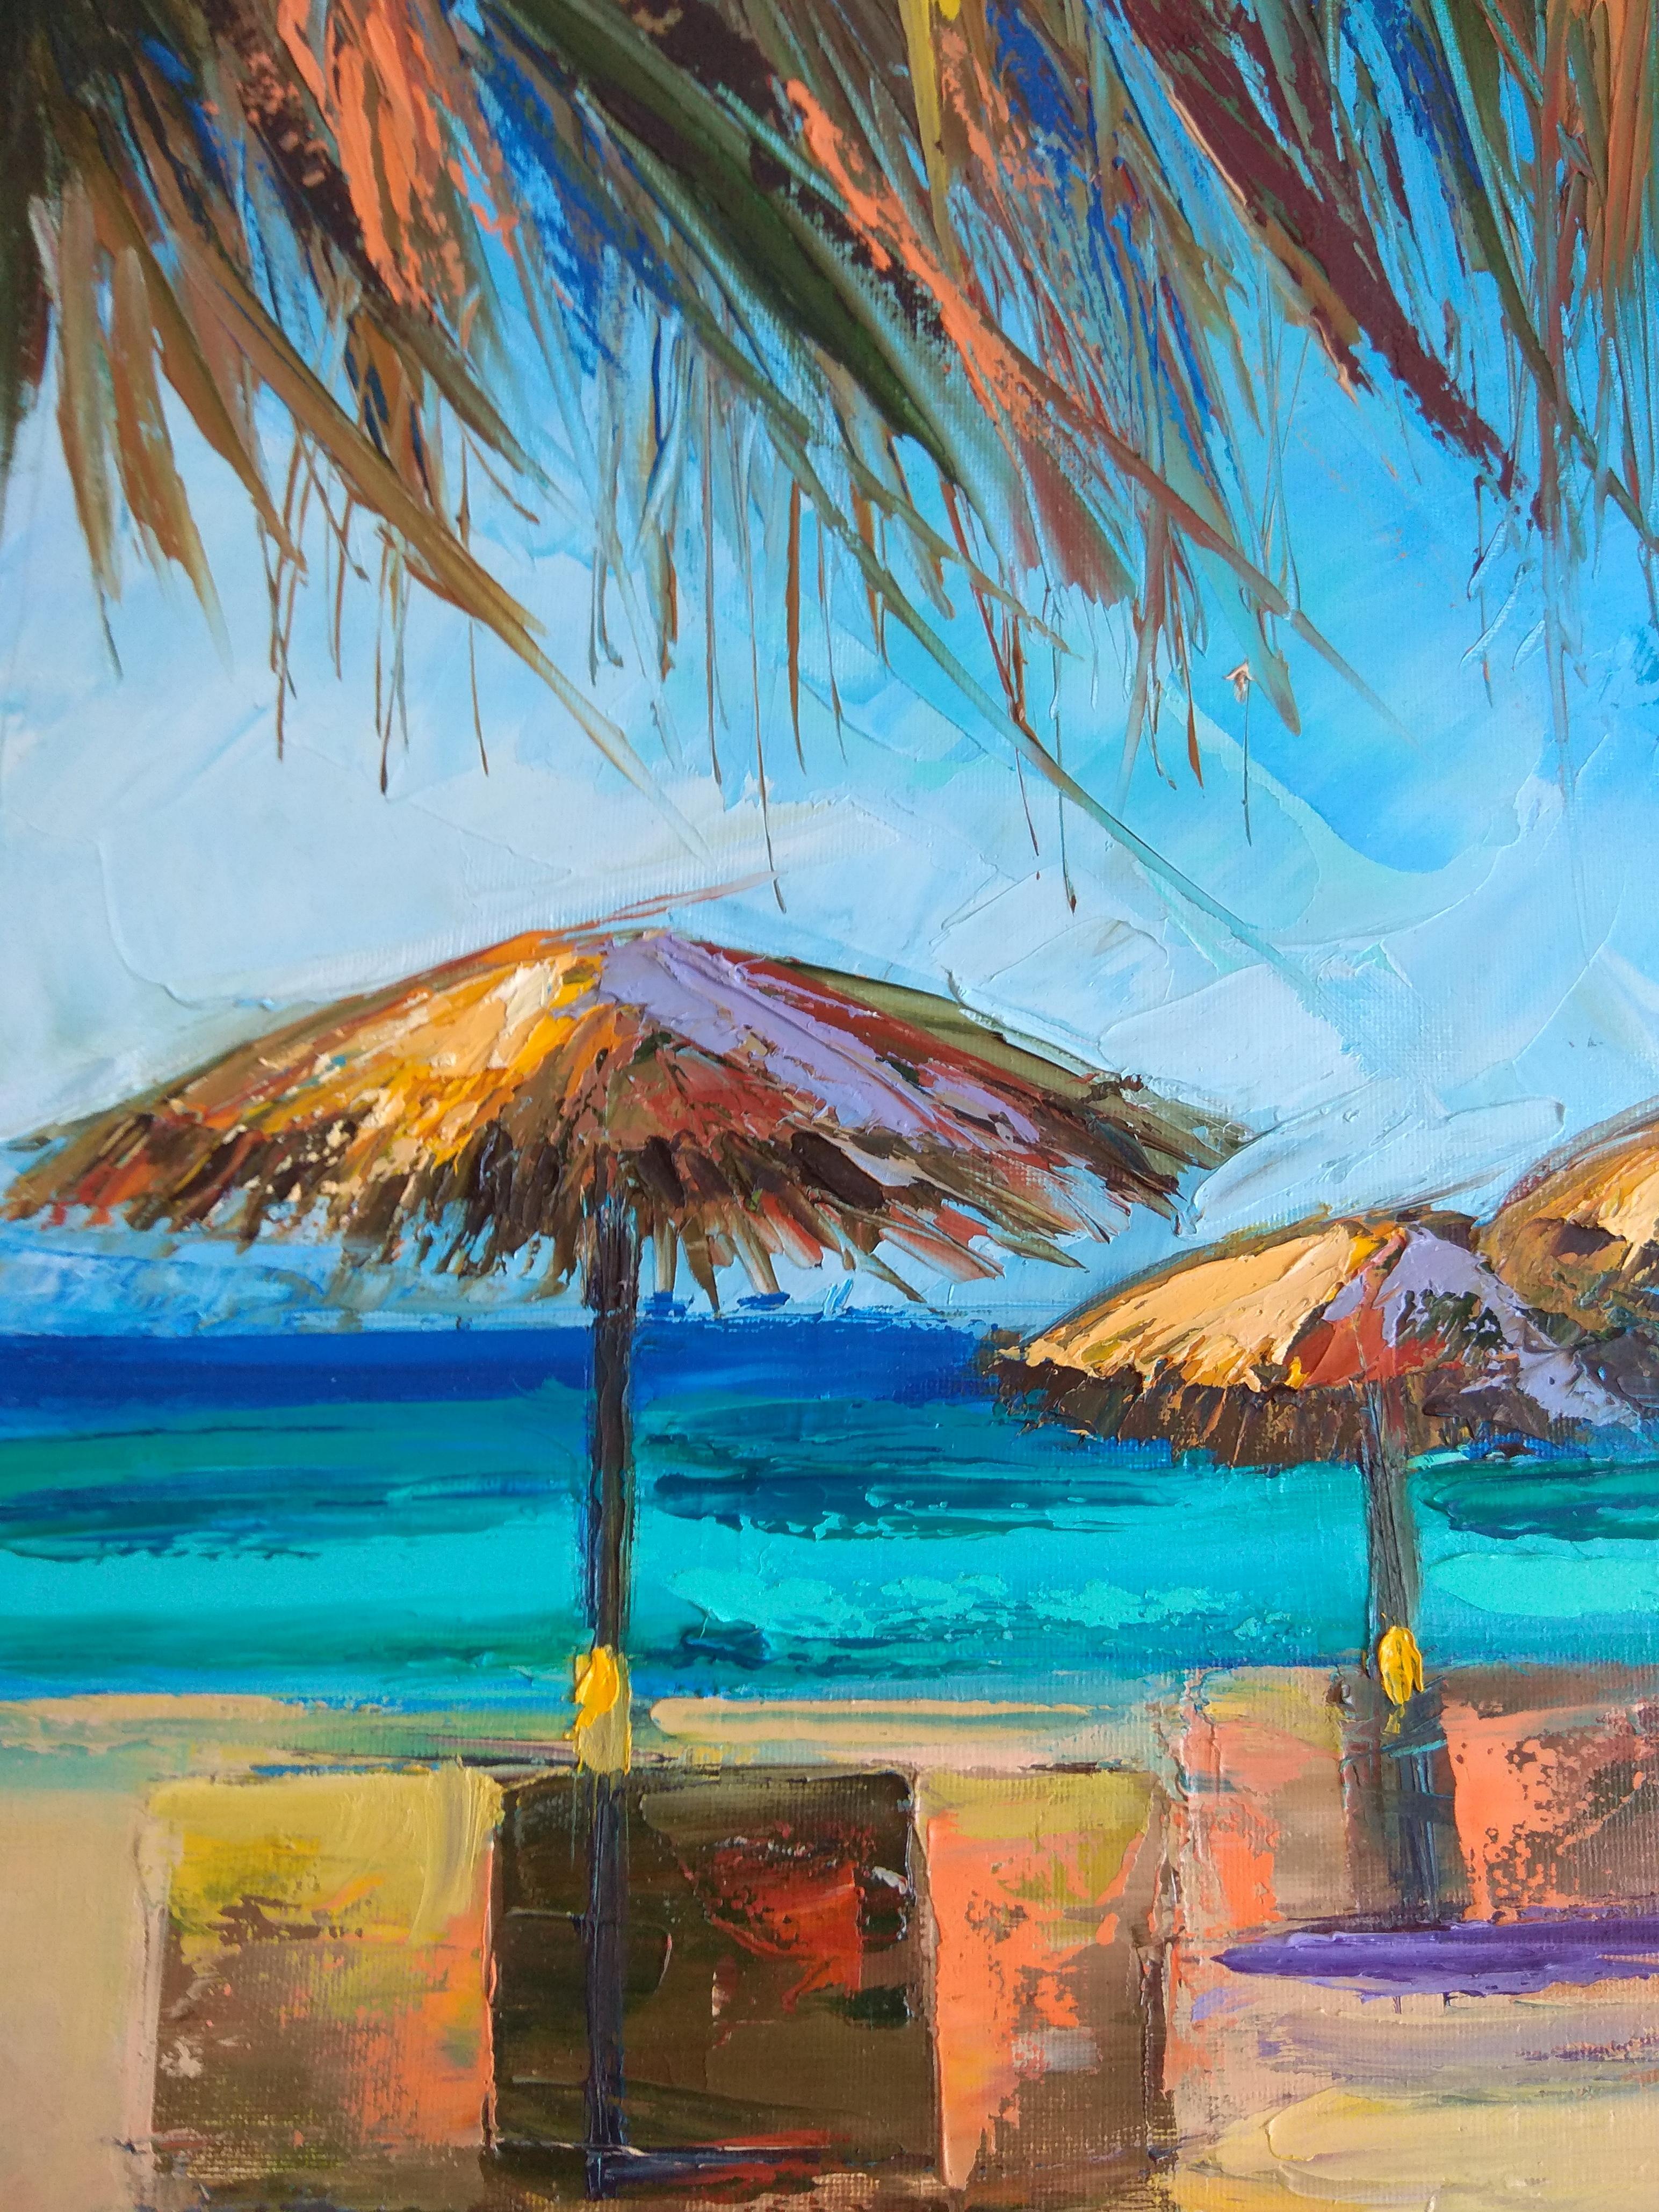 Introducing a stunning piece of artwork that captures the essence of a perfect beach day. This oil painting on canvas features a serene beach with the ocean in the background and sun umbrellas dotting the sand. The use of a palette knife creates a